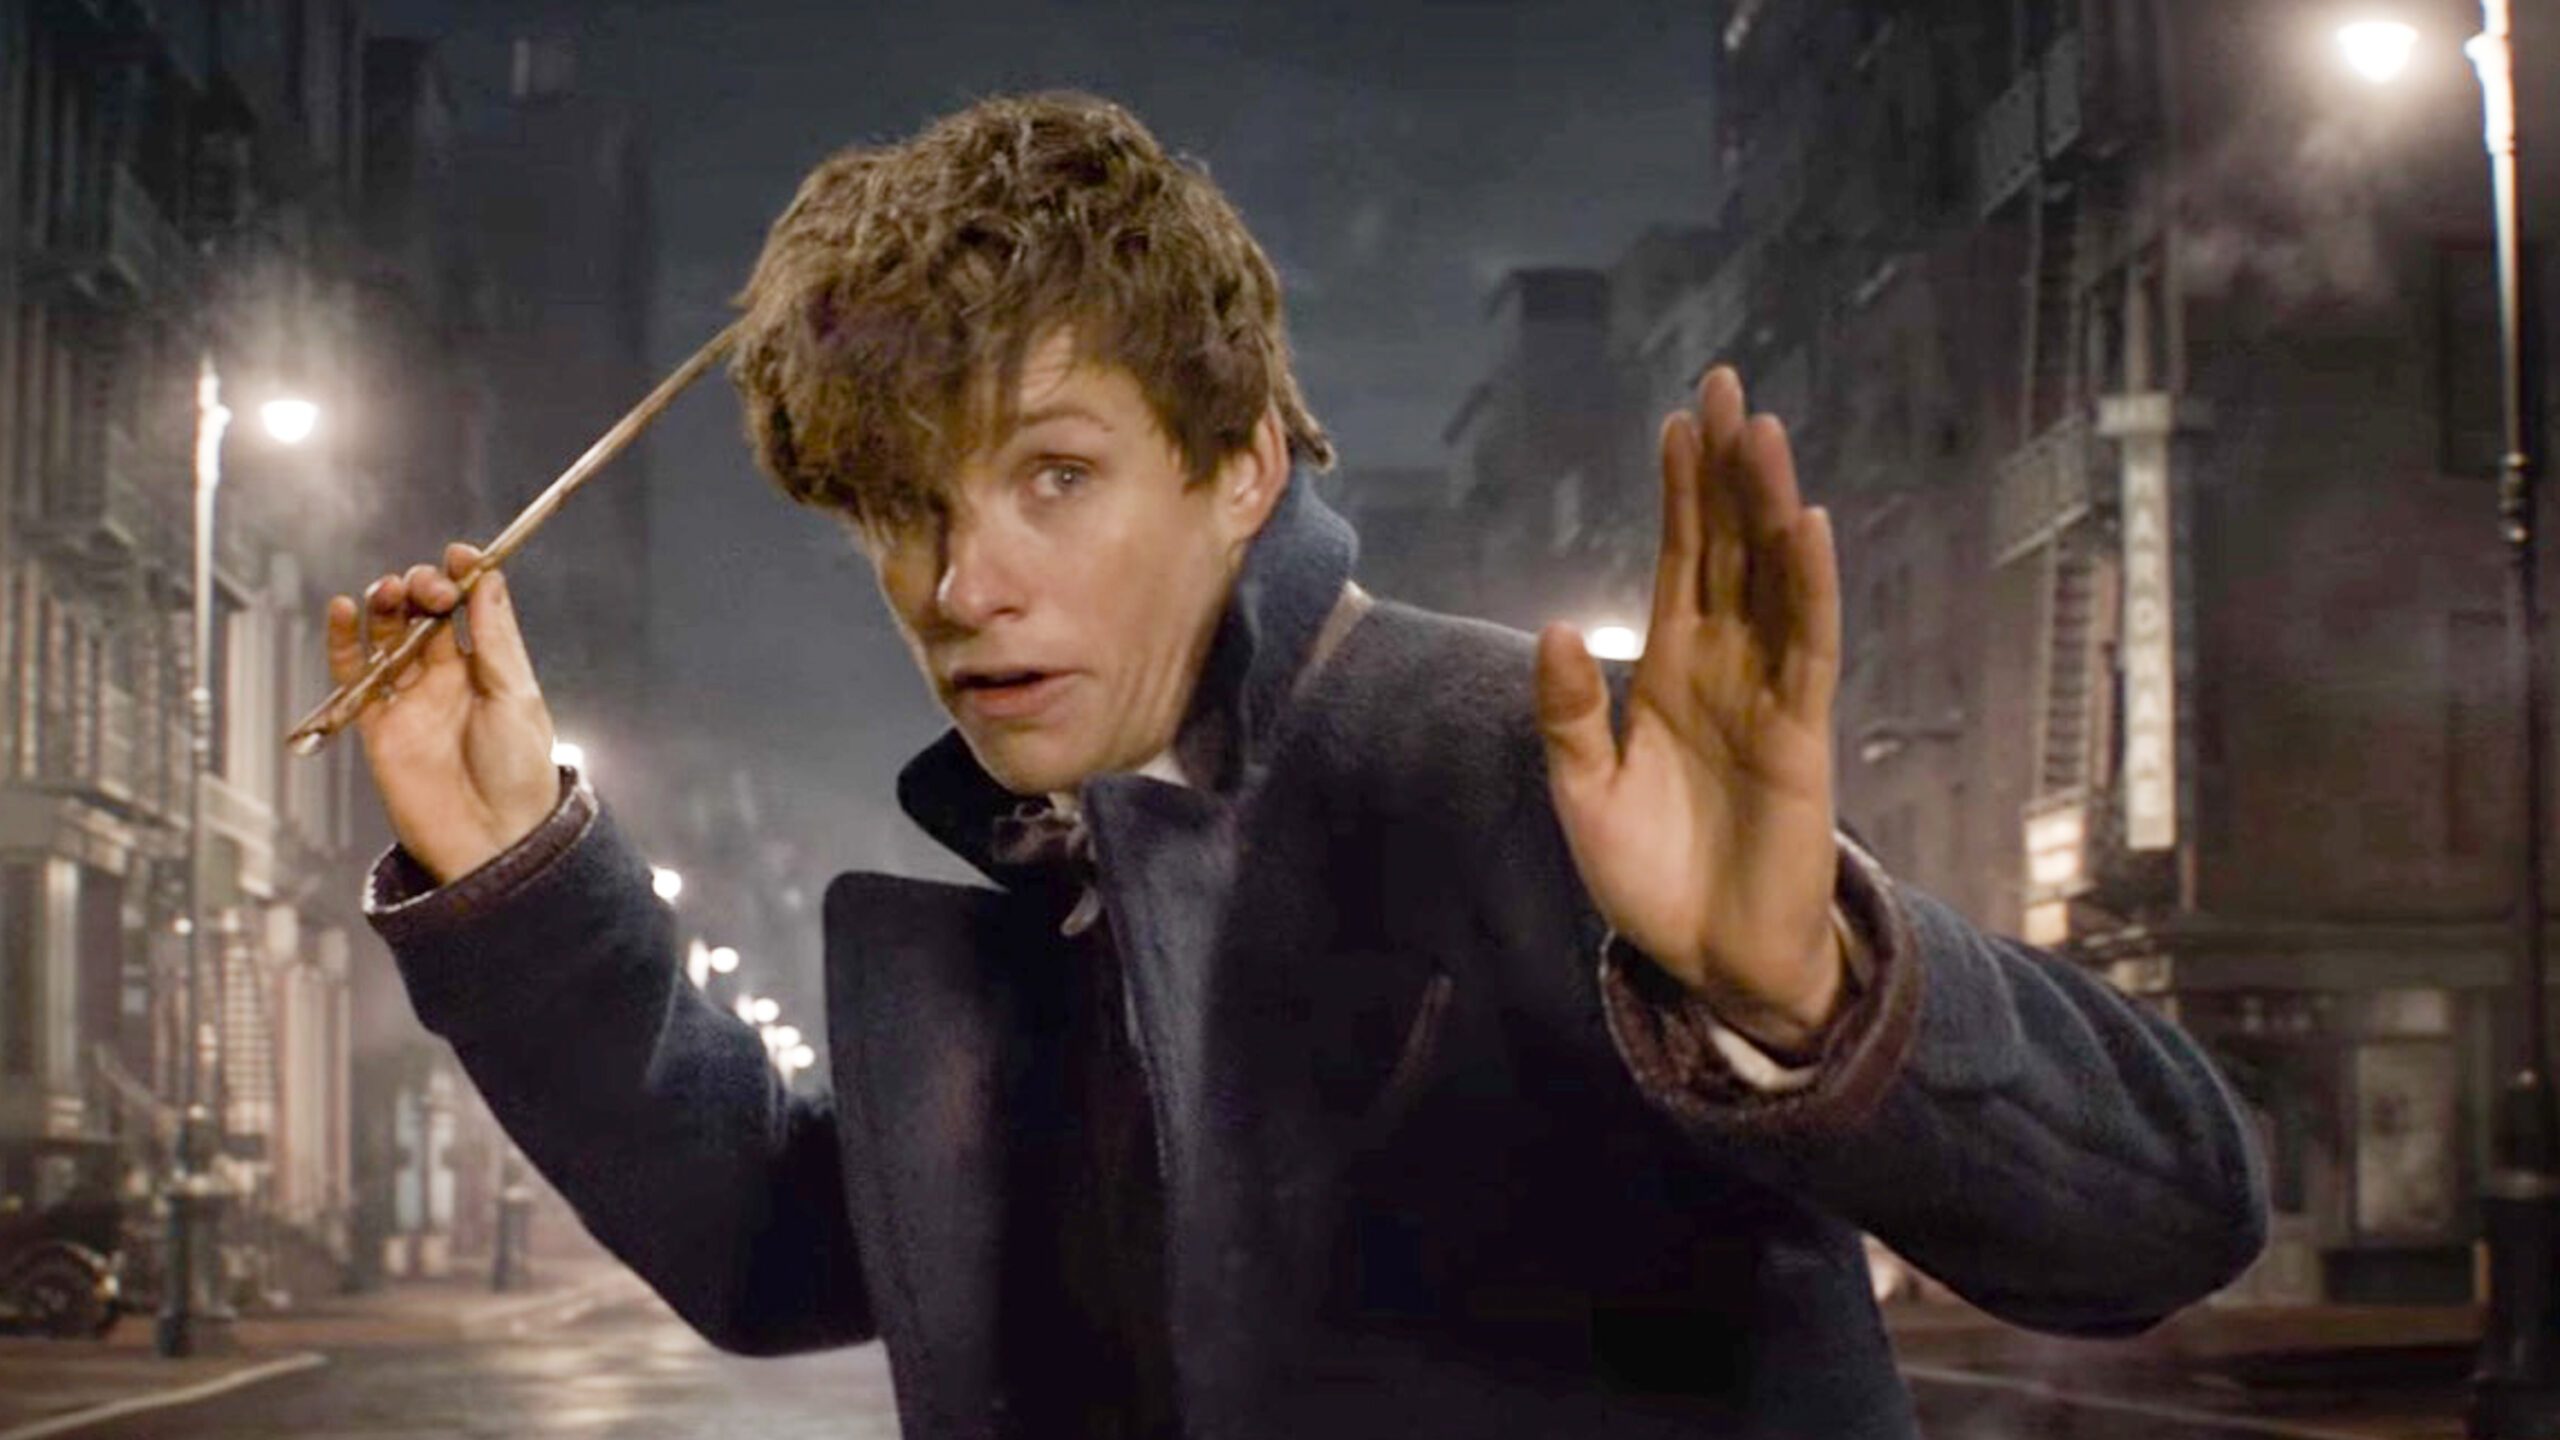 WATCH: New ‘Fantastic Beasts’ trailer features magical creatures